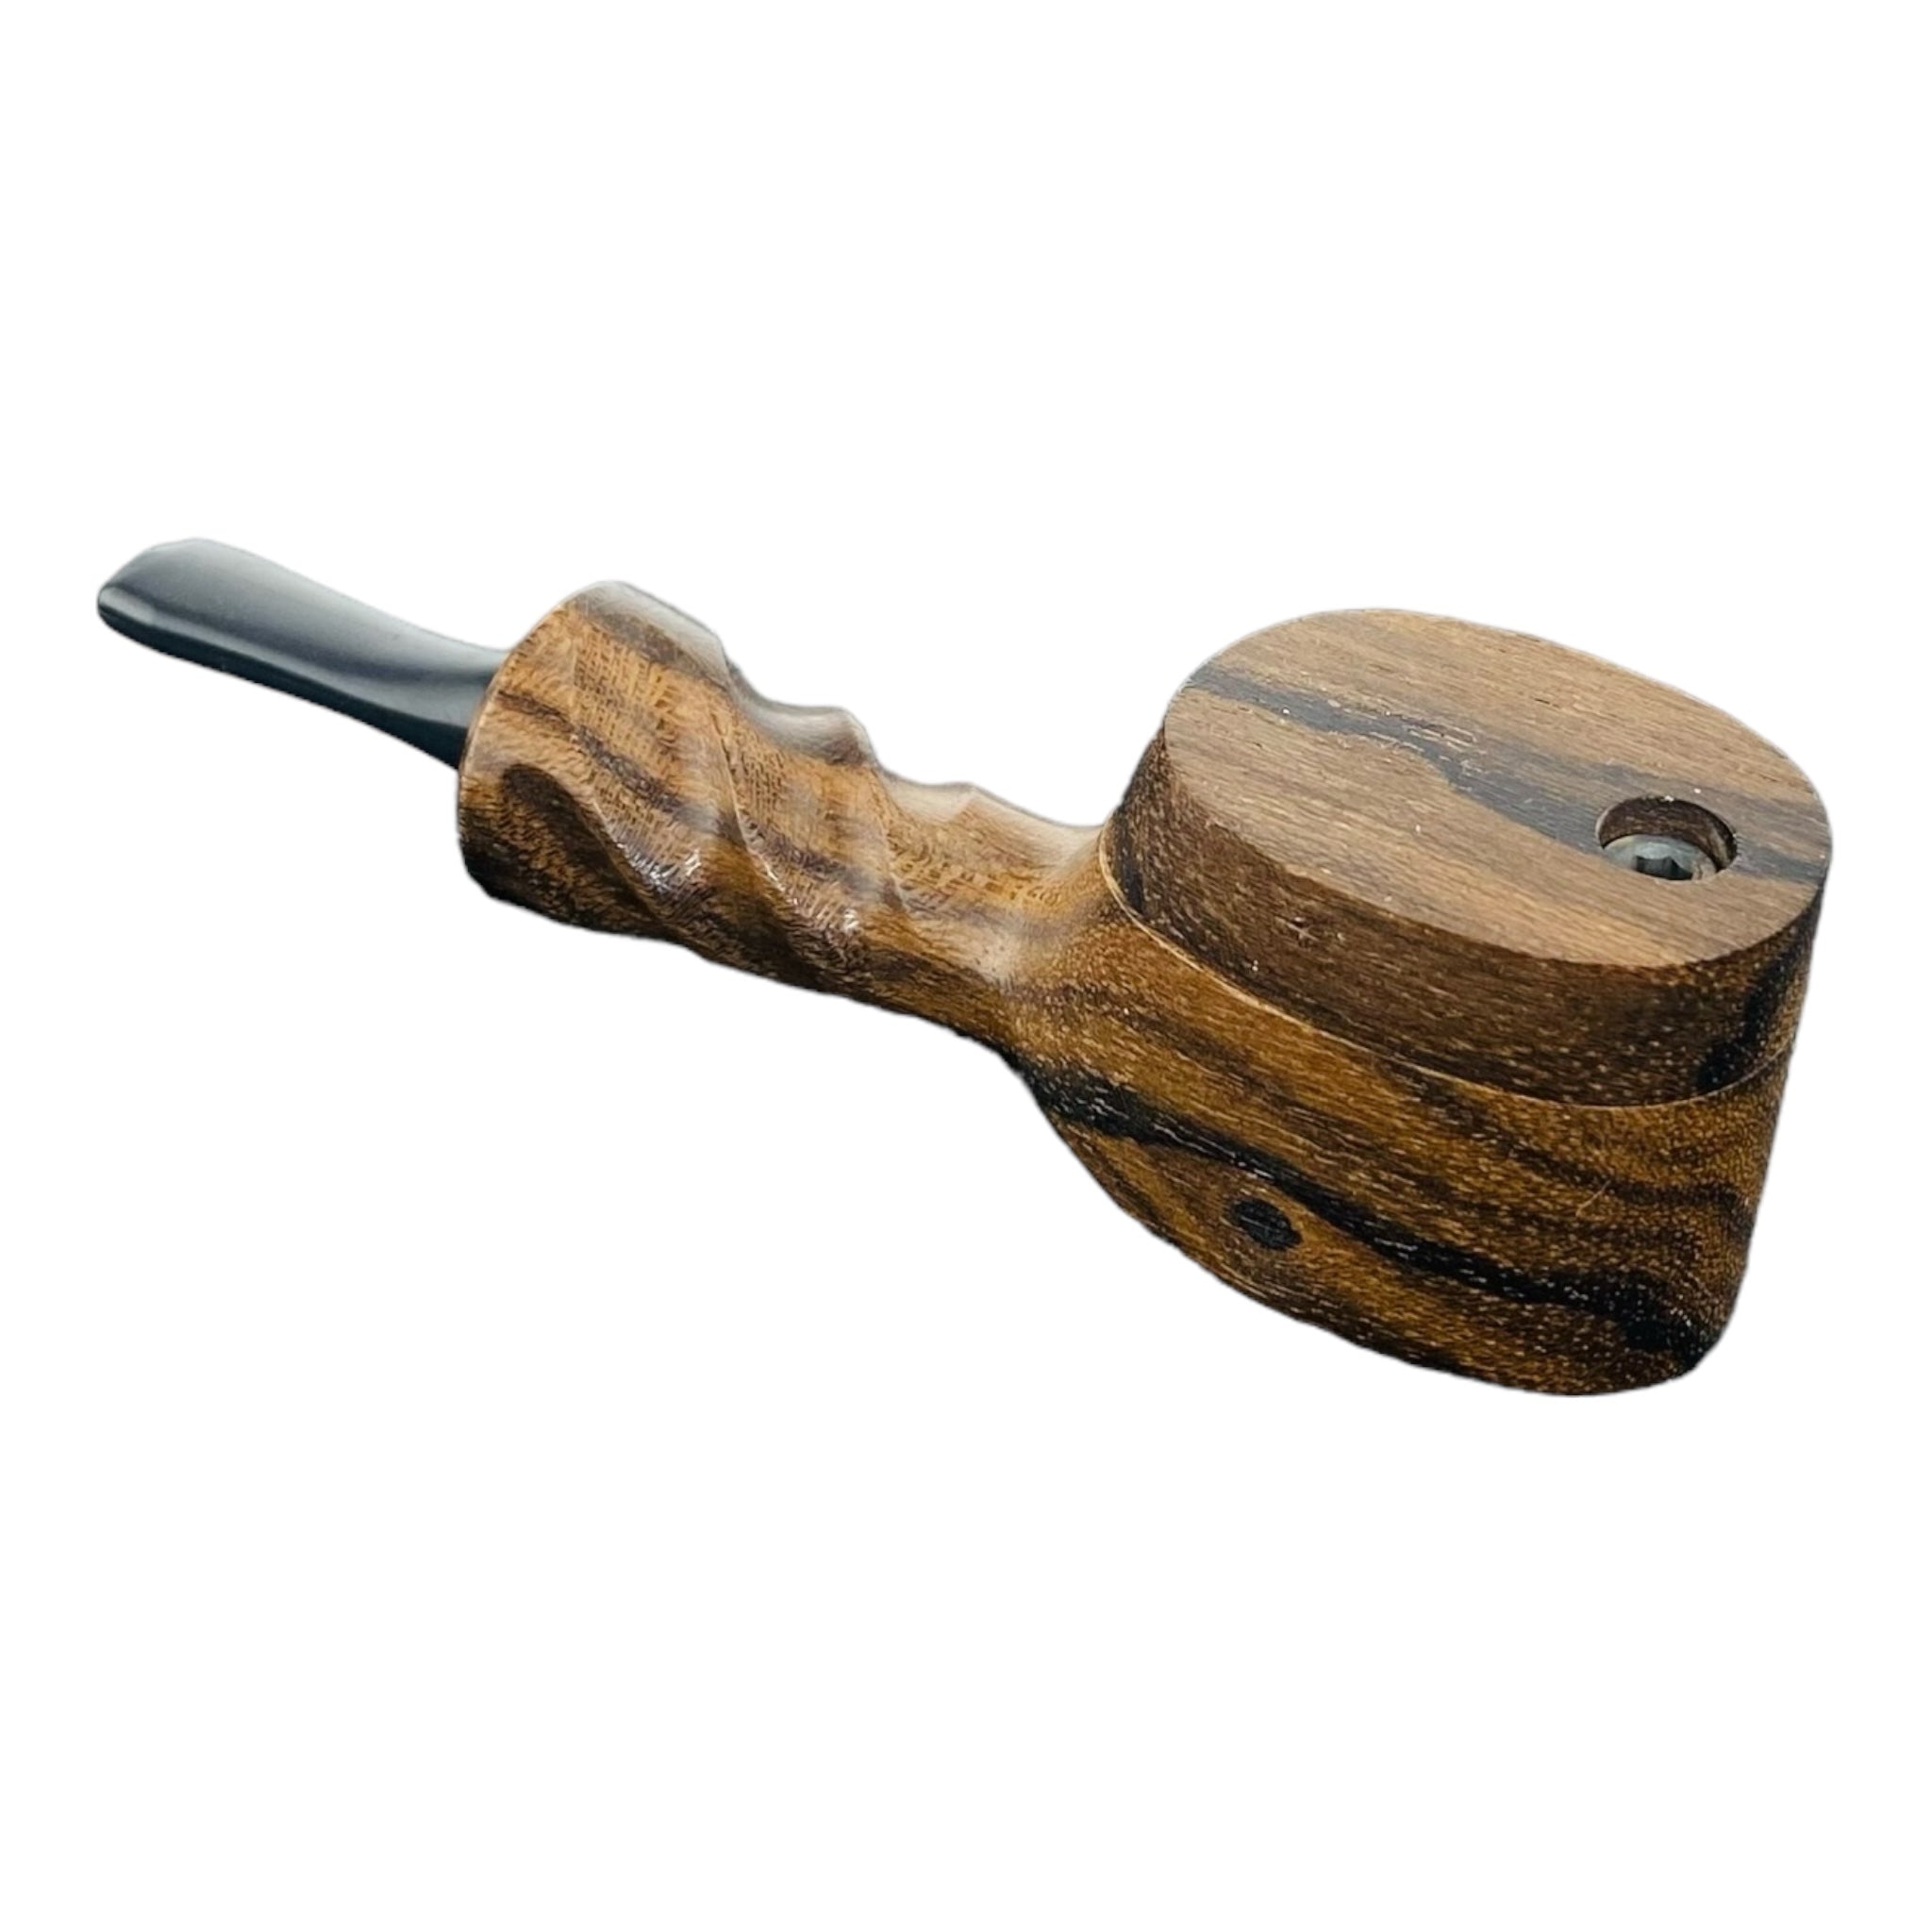 Wood Hand Pipe - Twsited Stem Wood Pipe With Lid